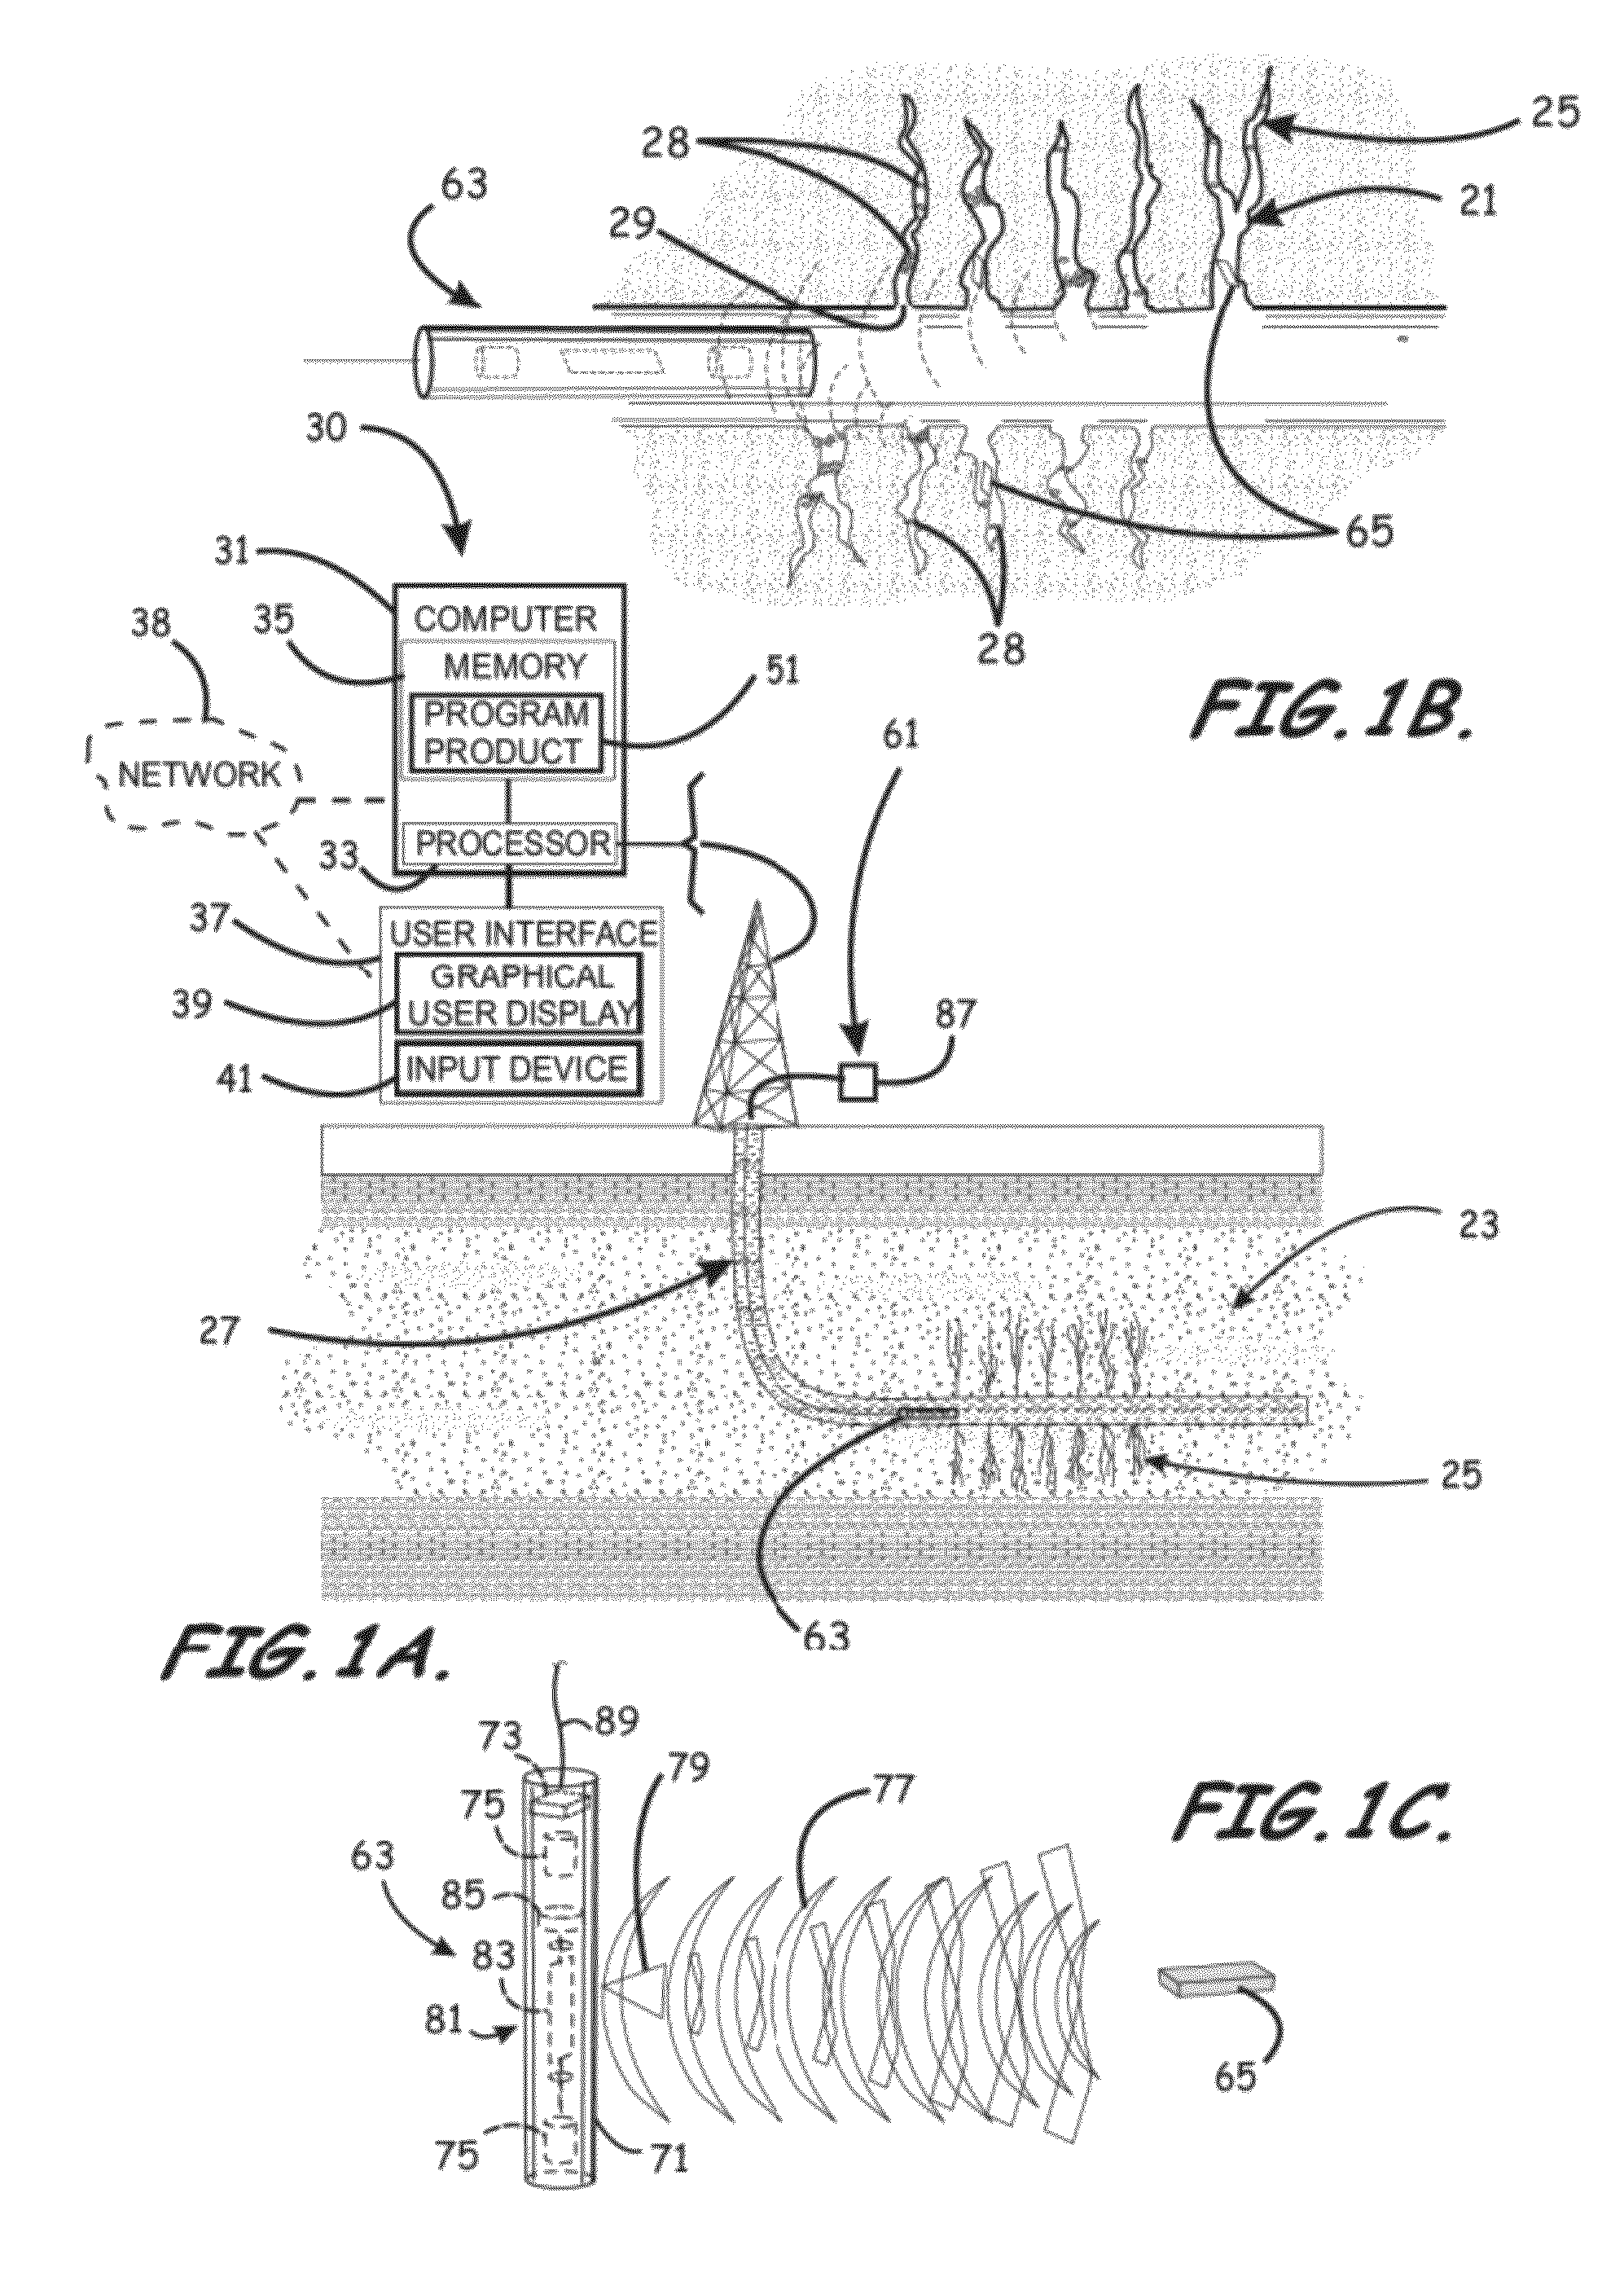 Methods of employing and using a hybrid transponder system for long-range sensing and 3D localizaton